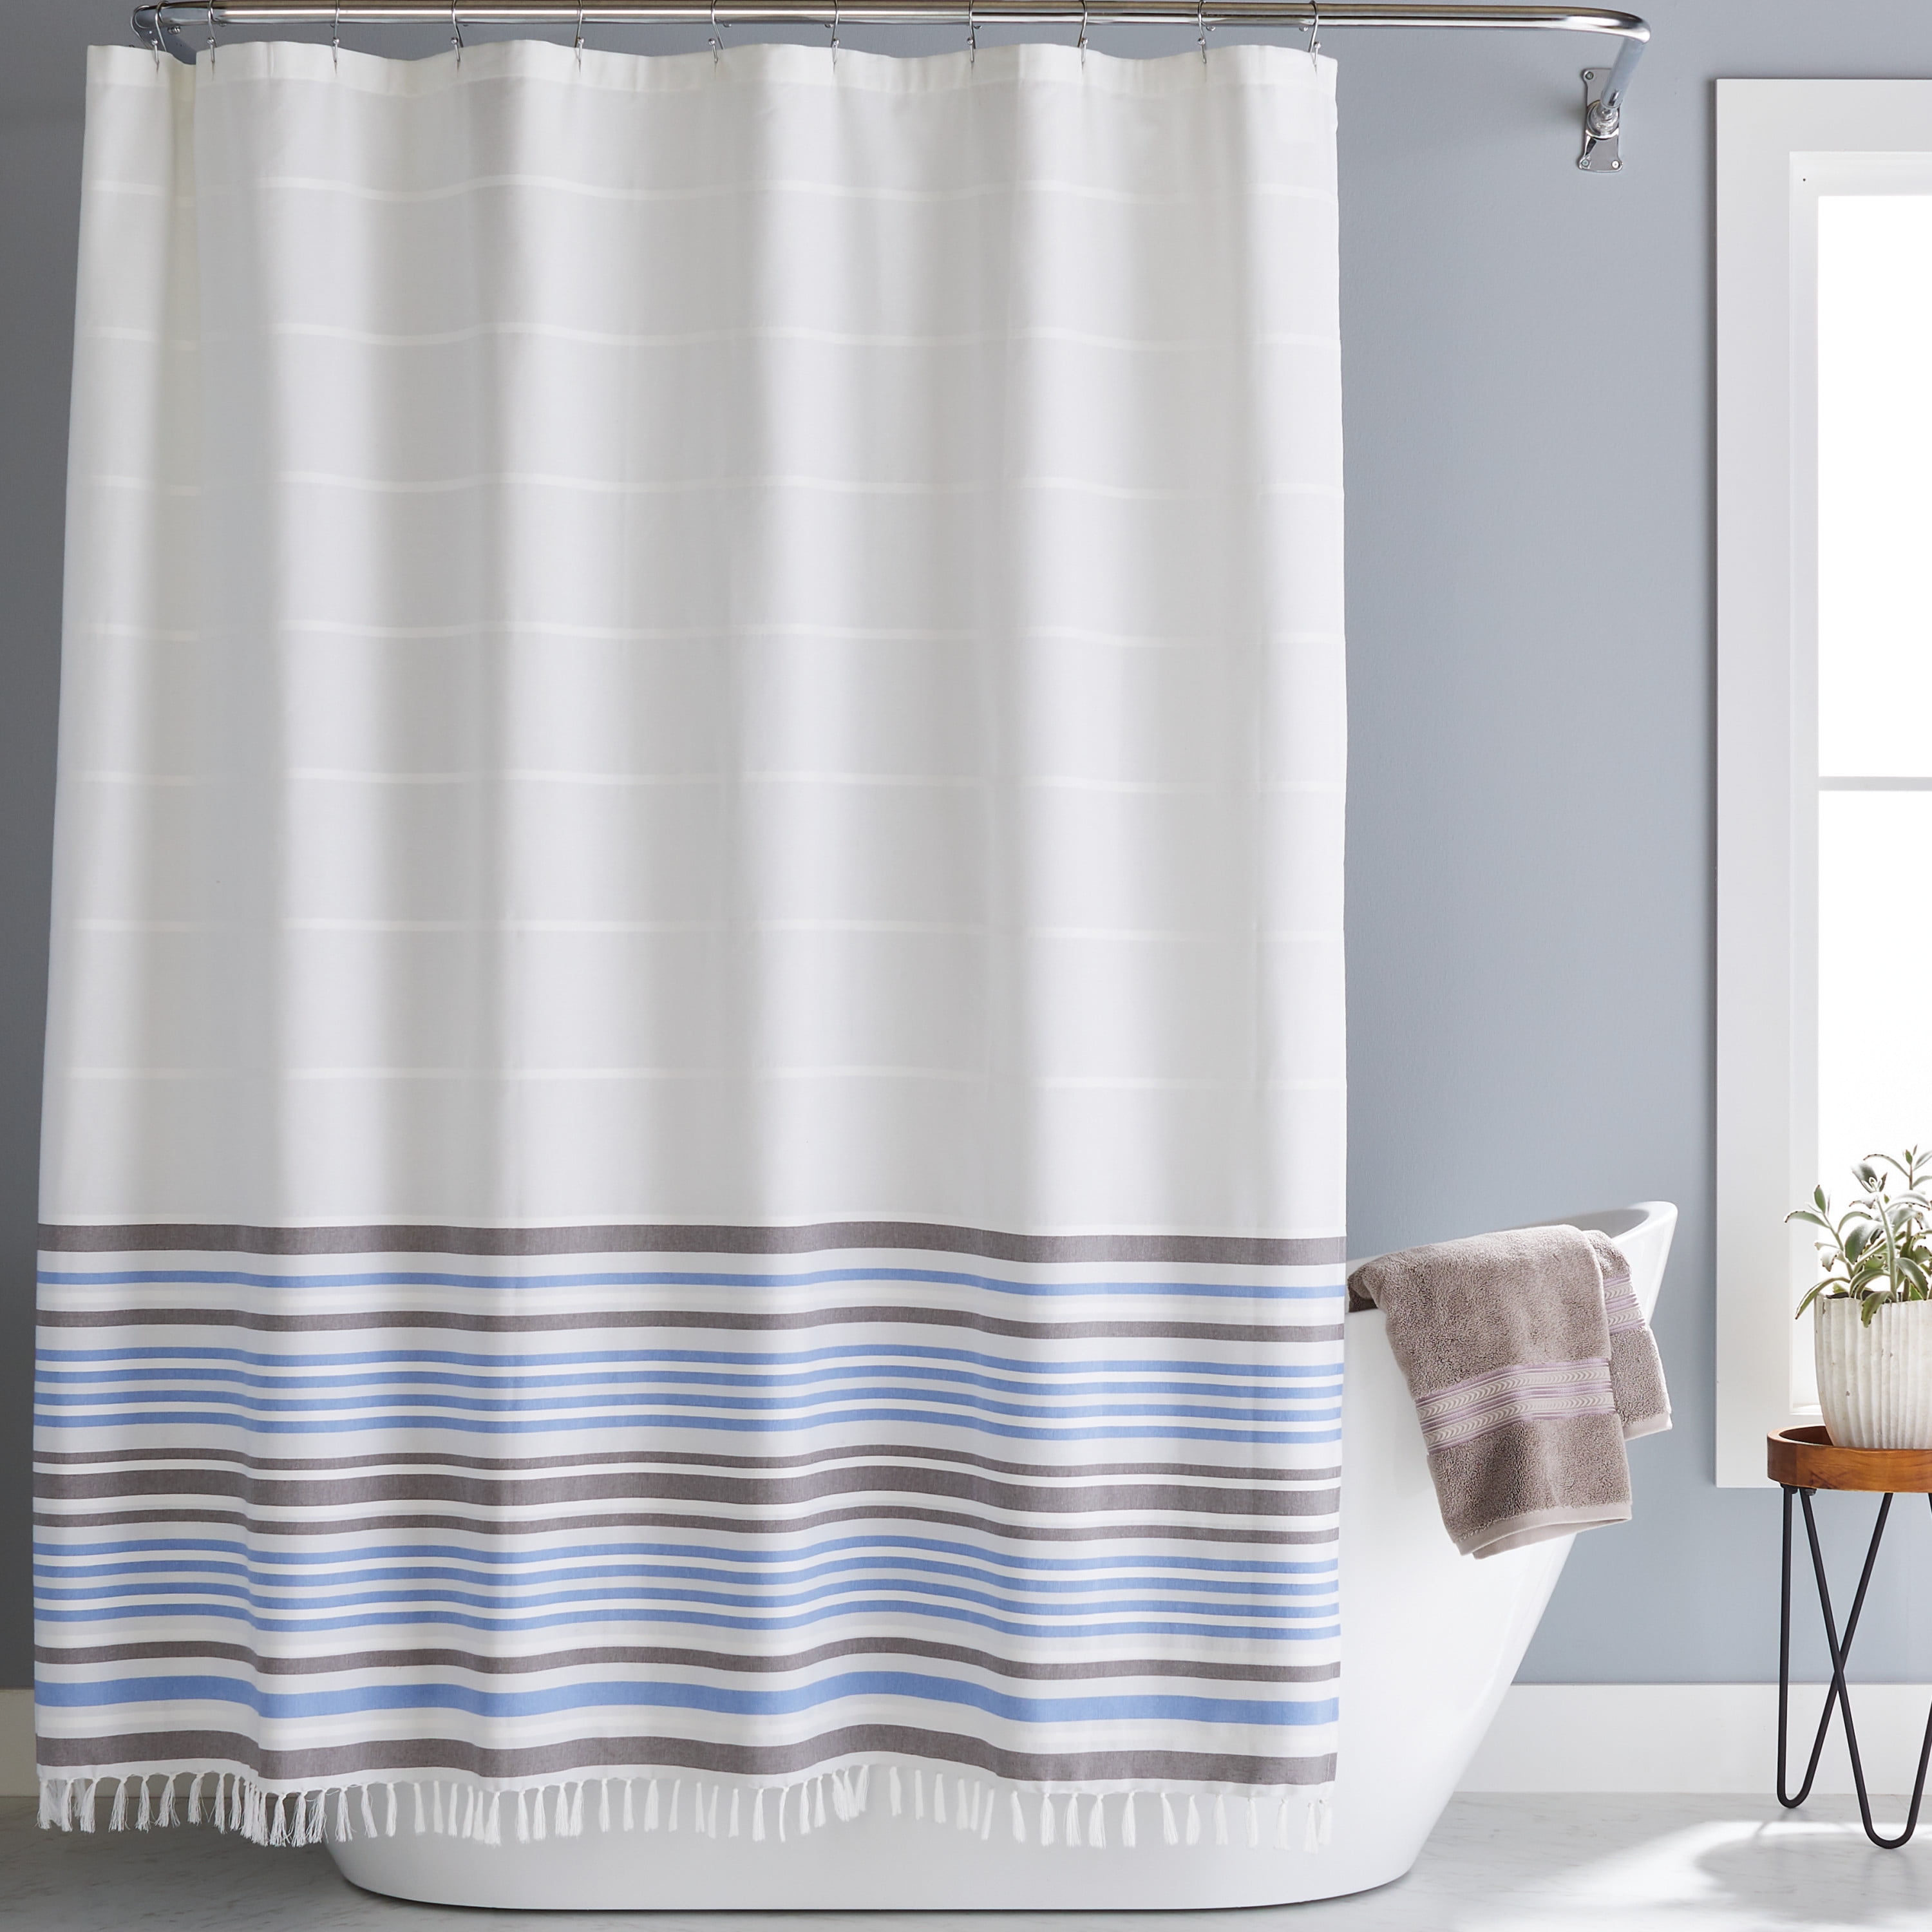 Cotton Shower Curtain Better Homes, All Cotton Shower Curtains